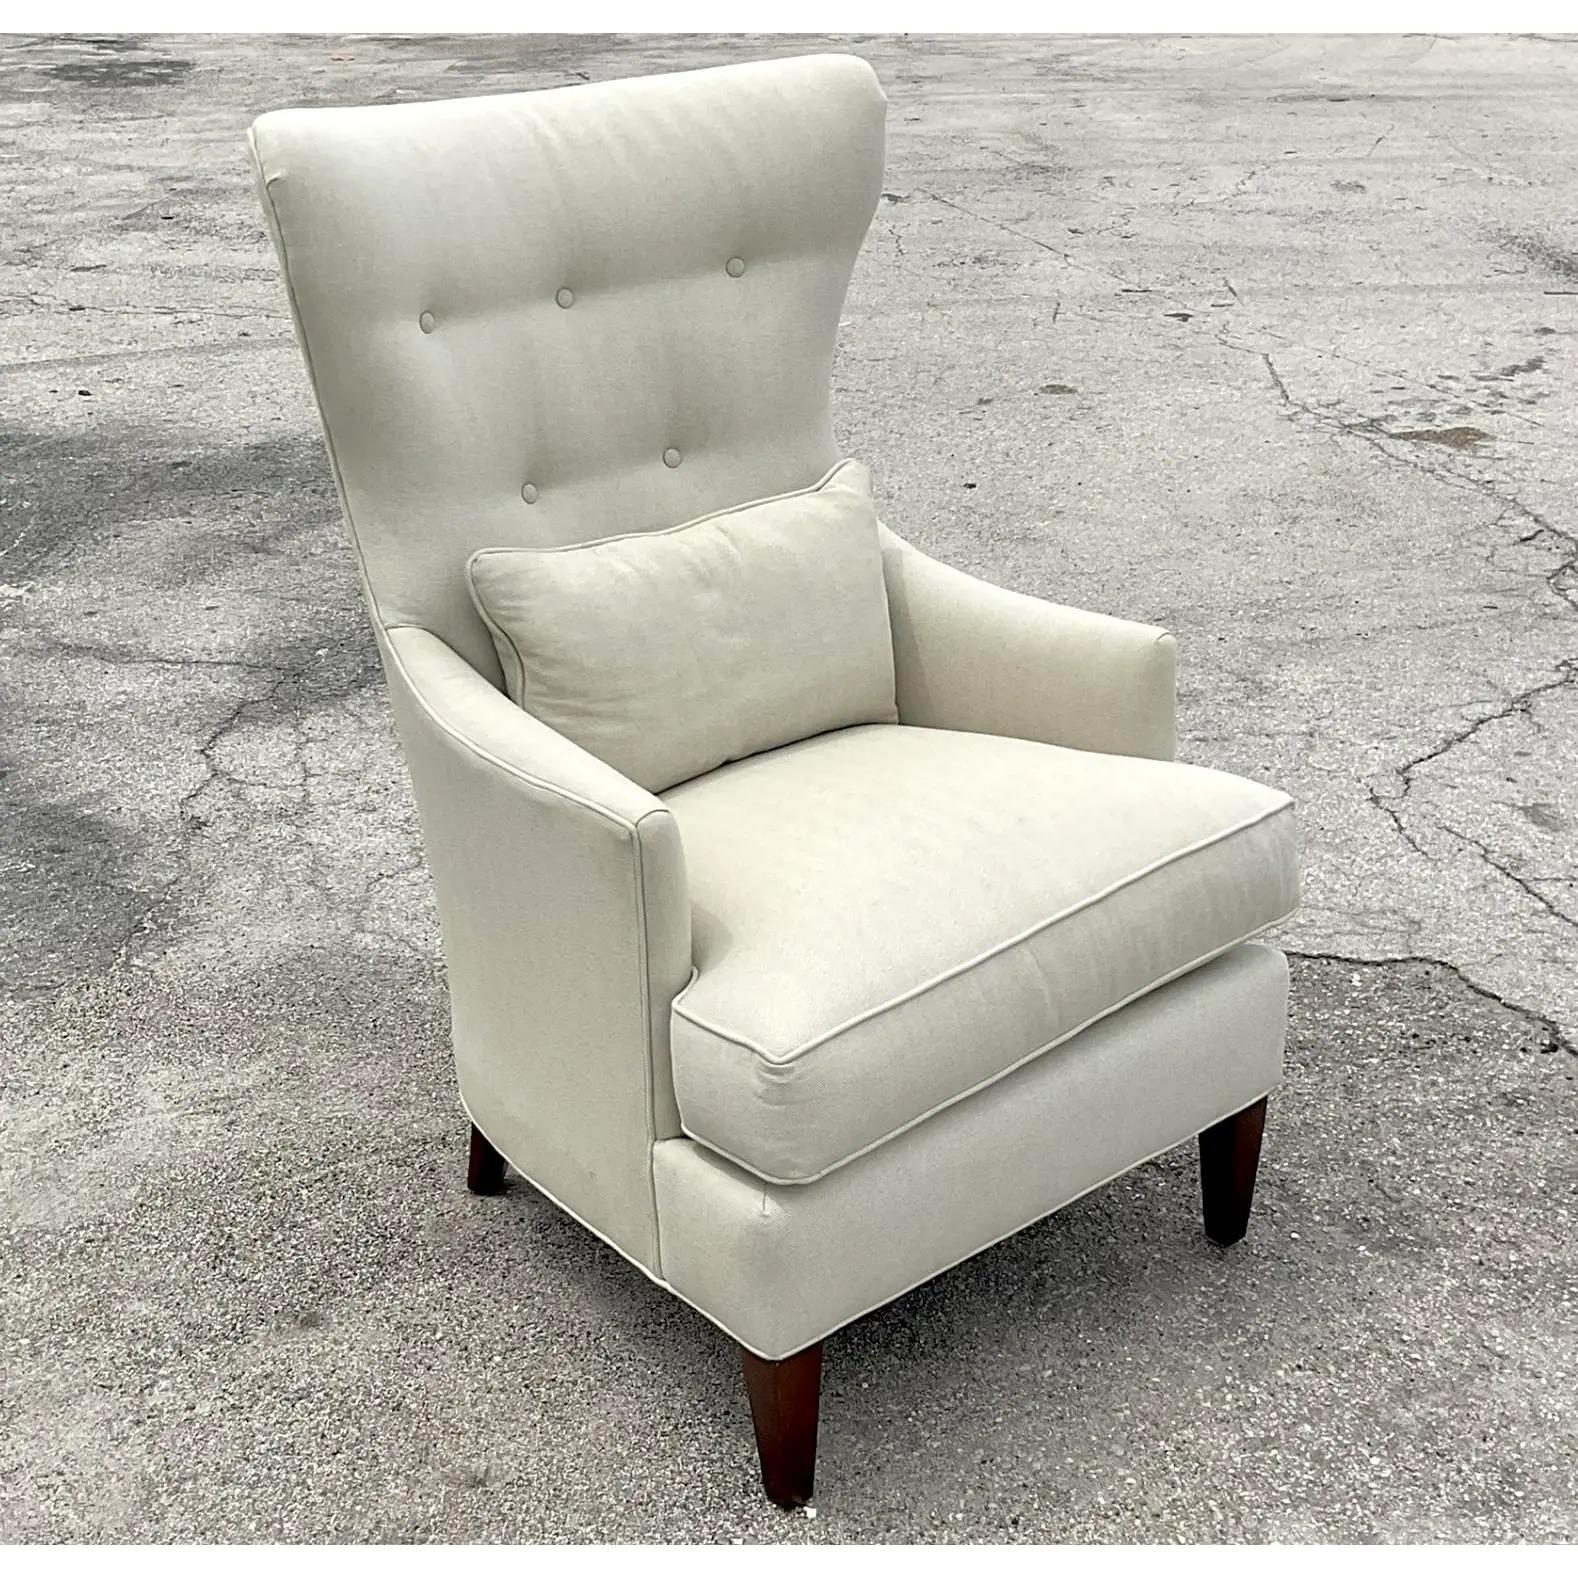 North American Vintage Contemporary Huntington House Wingback Chair